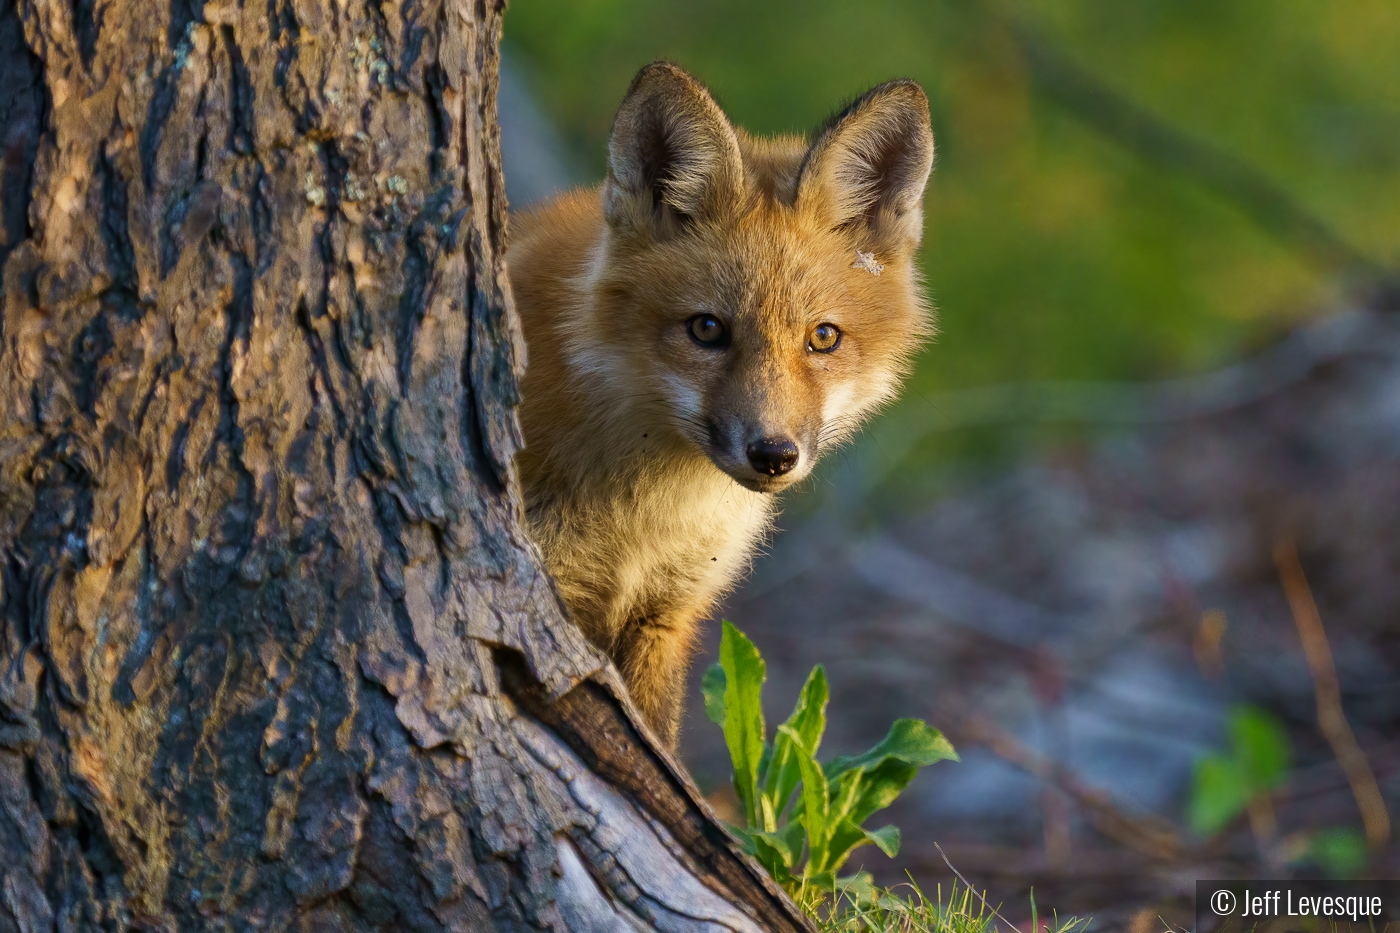 Curious Youngster by Jeff Levesque